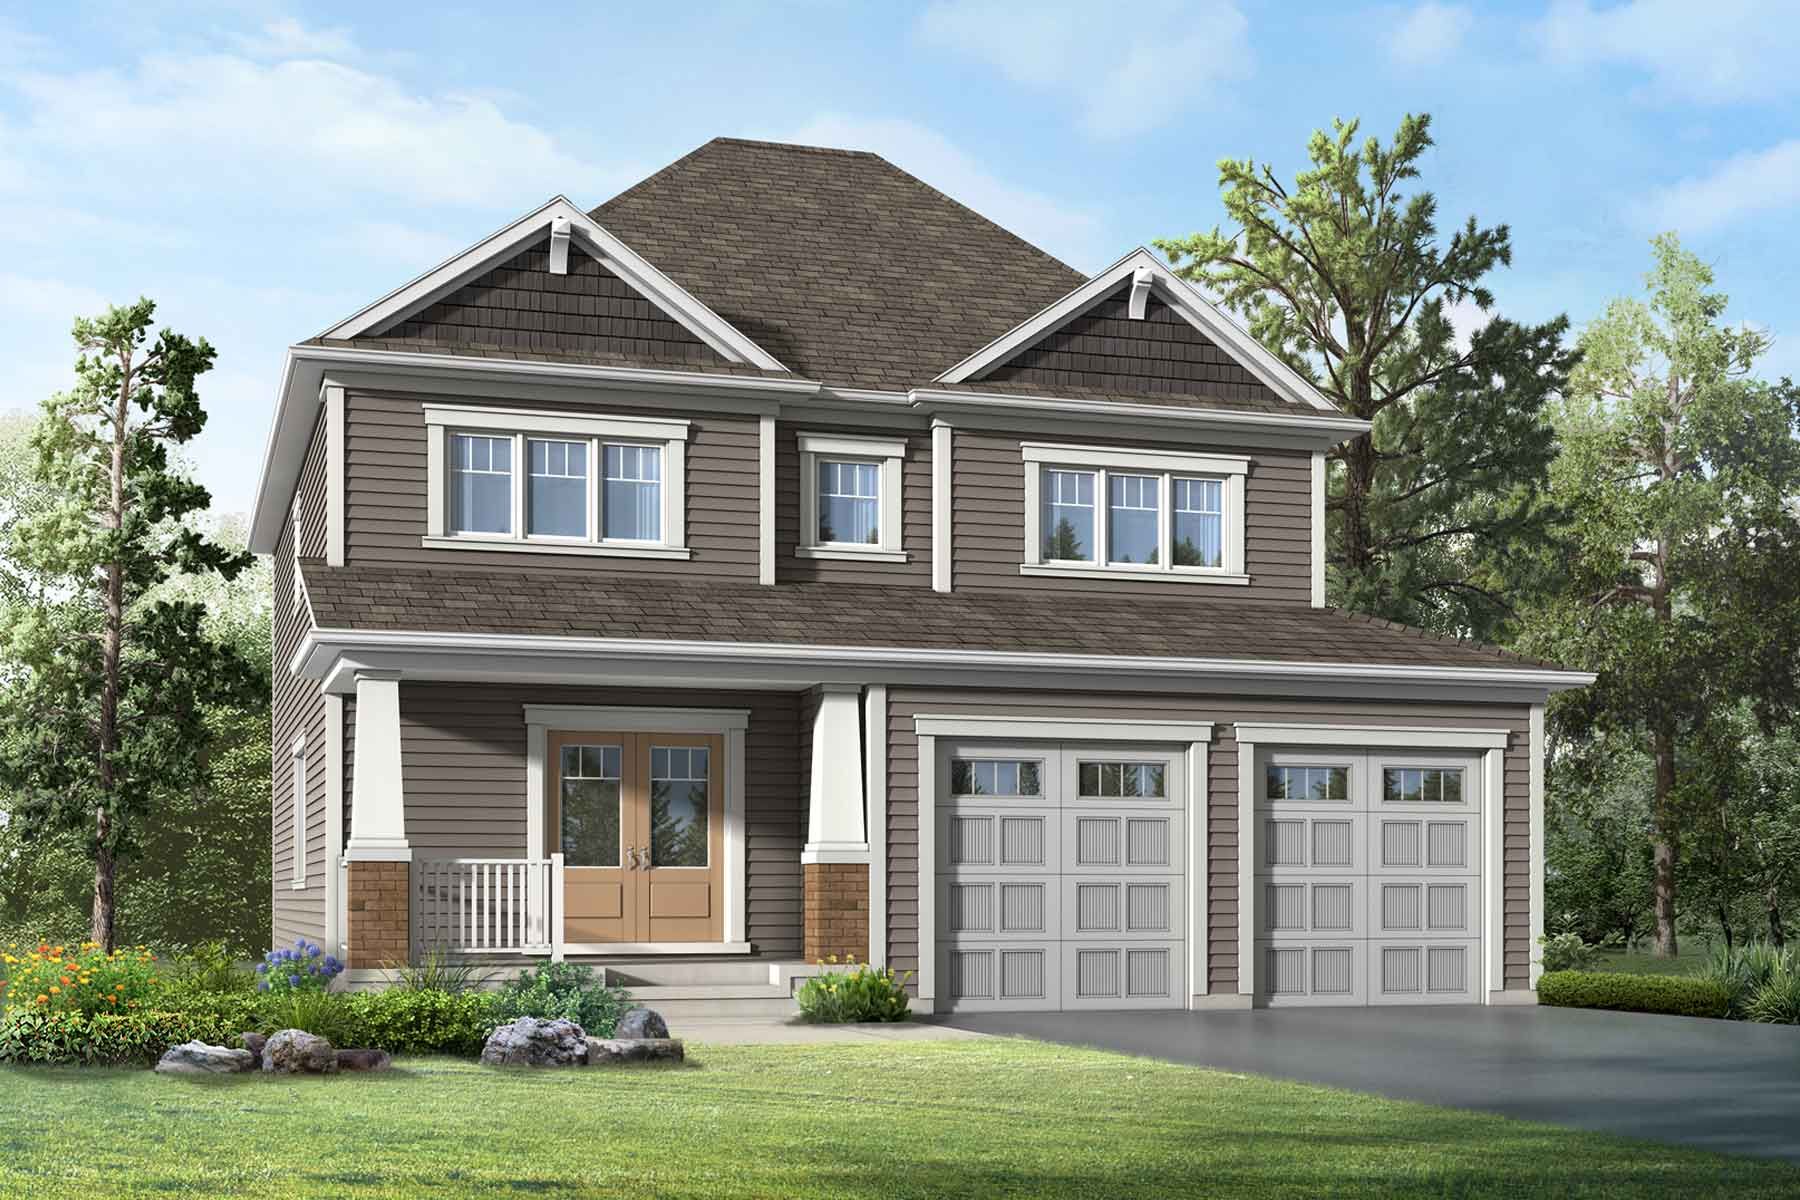 A Craftsman style elevation with double car garage and brown siding.